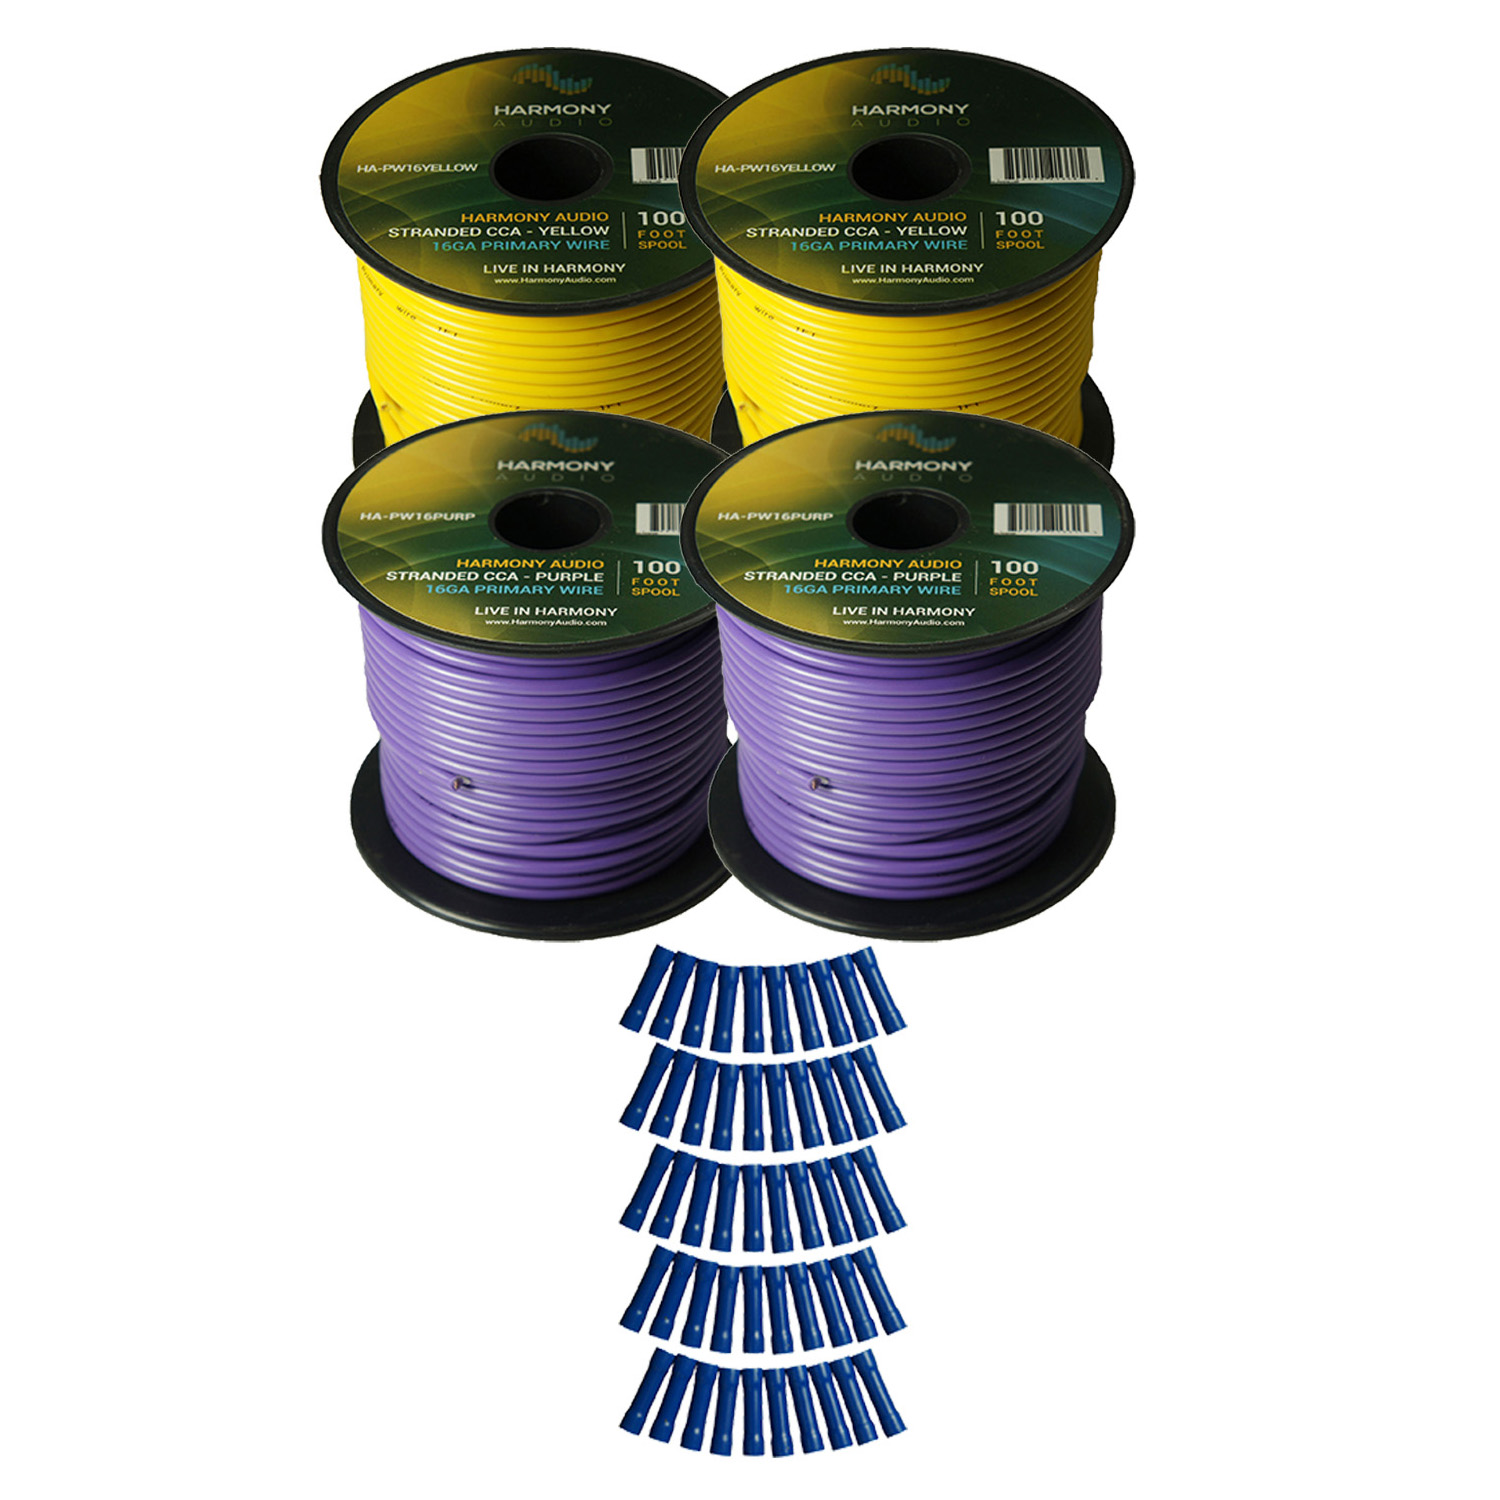 Harmony Audio Primary Single Conductor 16 Gauge Power or Ground Wire - 4 Rolls - 400 Feet - Yellow & Purple for Car Audio / Trailer / Model Train / Remote